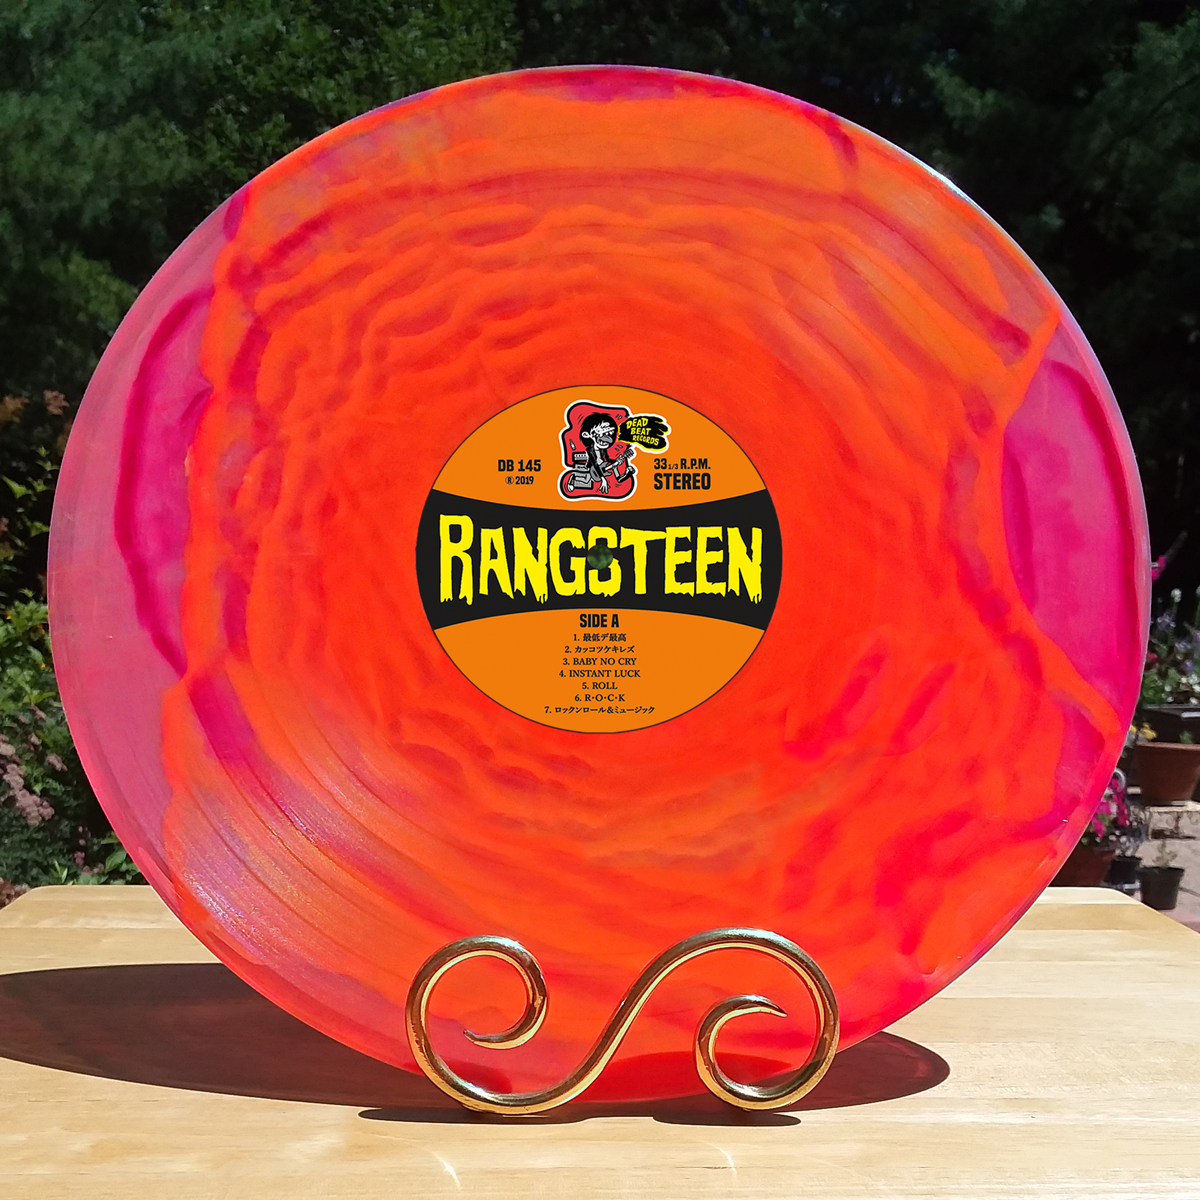 Rangsteen- S/T LP ~RAREST VOLCANIC LAVA BURST (WAX MAGE) EDITION LIMITED TO 25 COPIES!